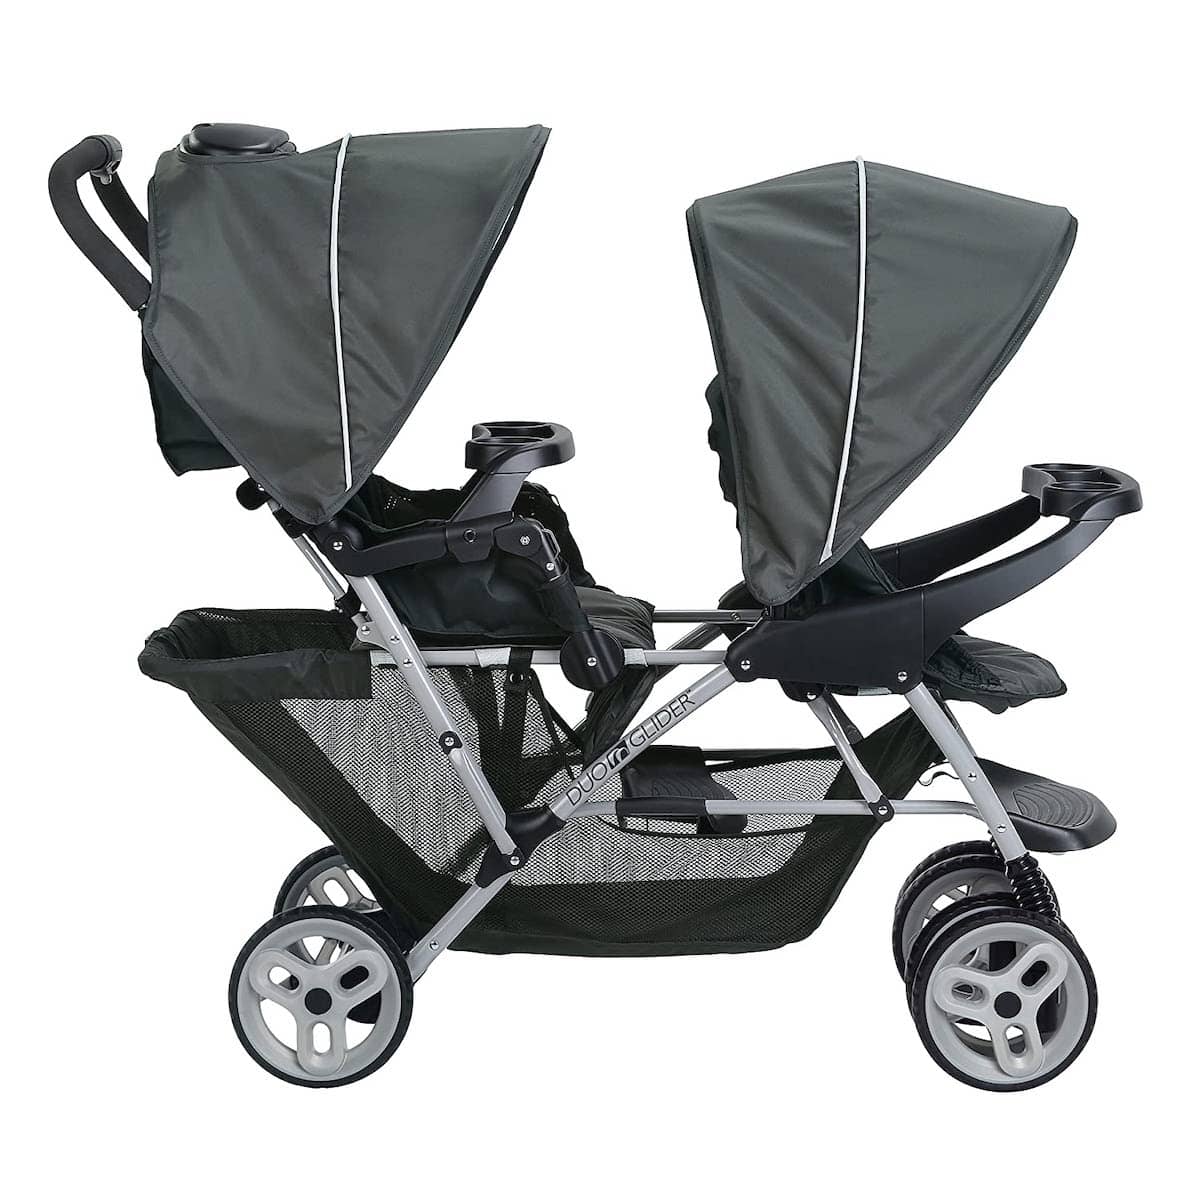 Graco Duo glider Double Stroller